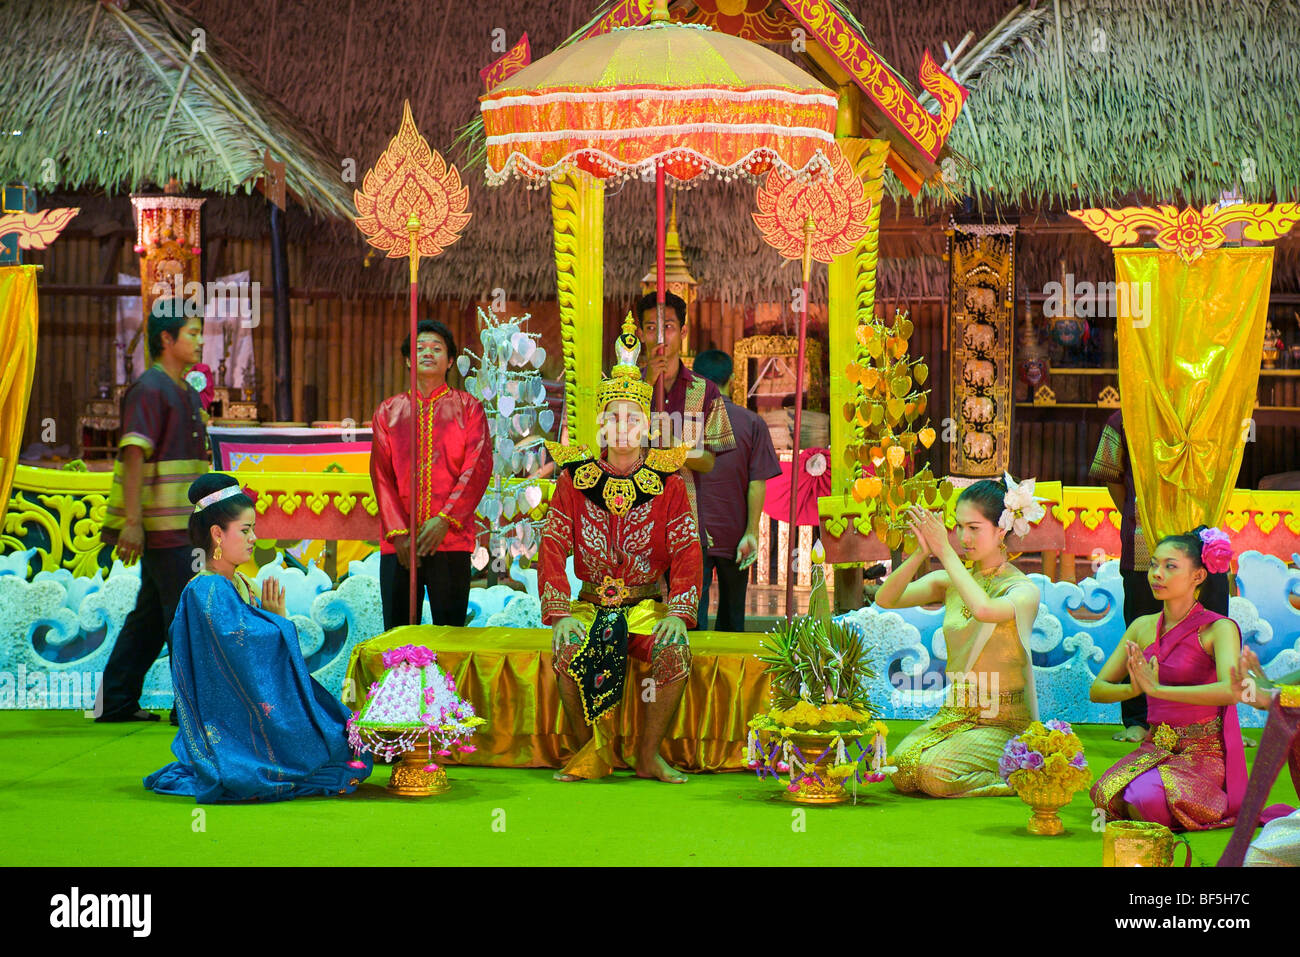 Dance show in Phuket Town, portrayal of a traditional wedding, Phuket Island, Thailand, Asia Stock Photo